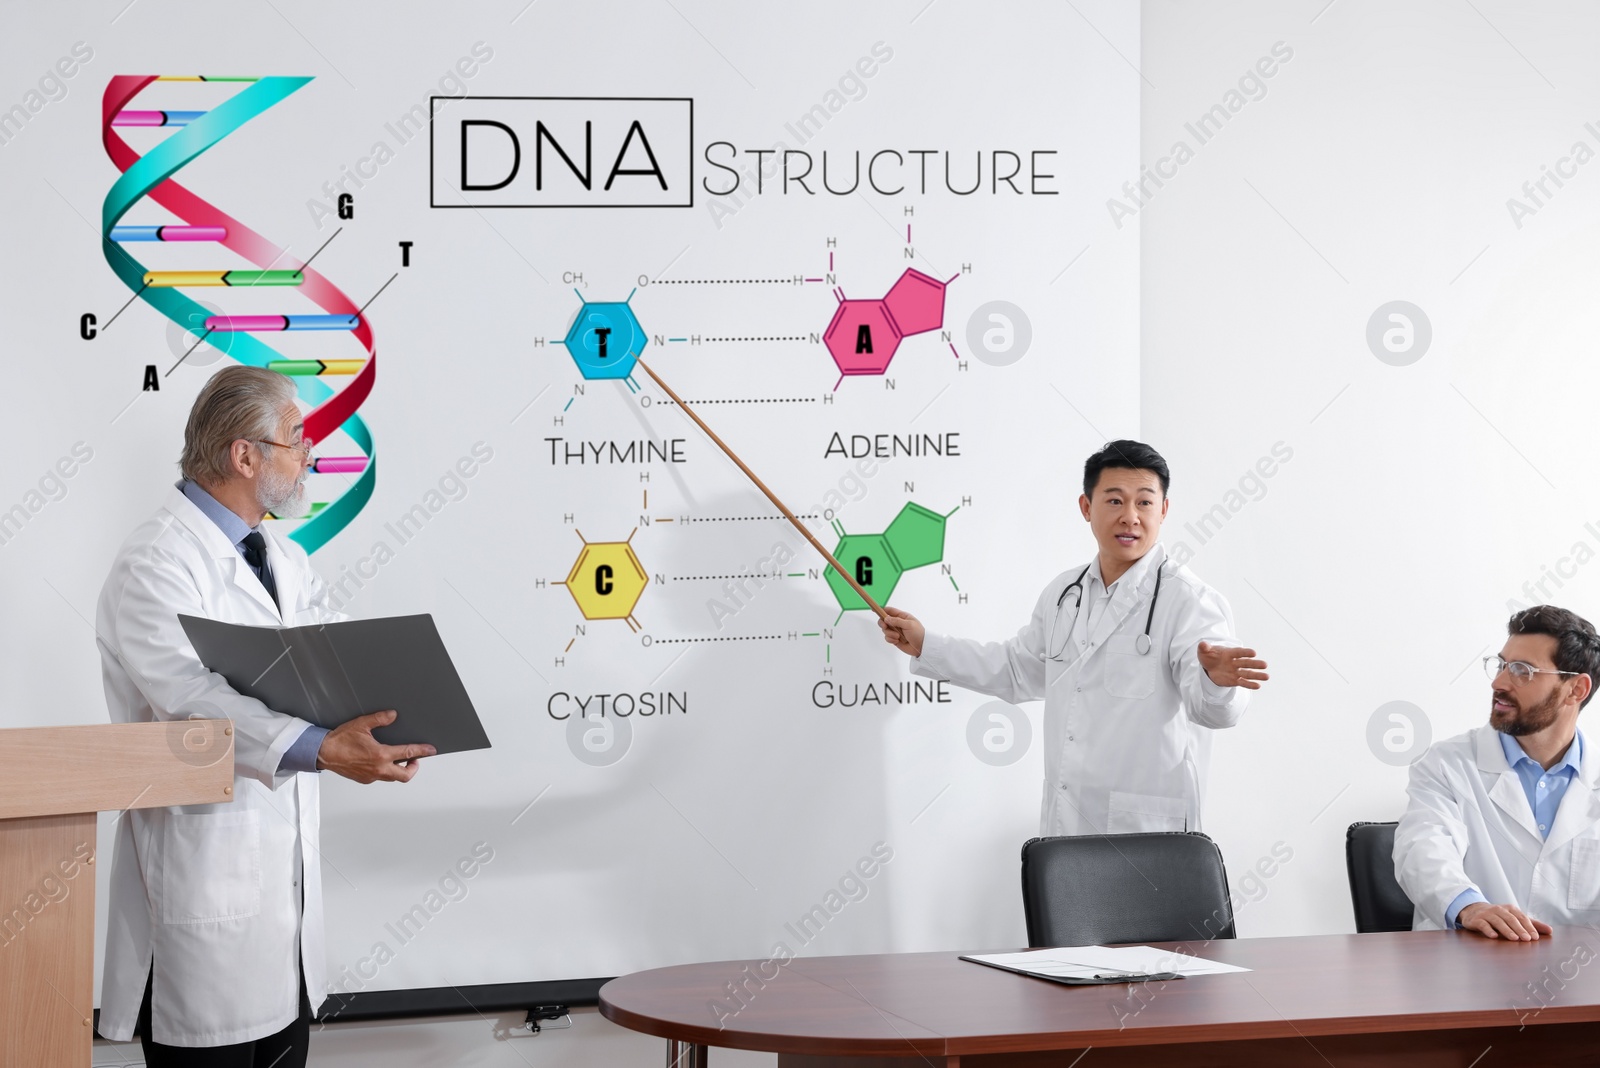 Image of Professors giving lecture in DNA structure in conference room. Projection screen with illustration and information